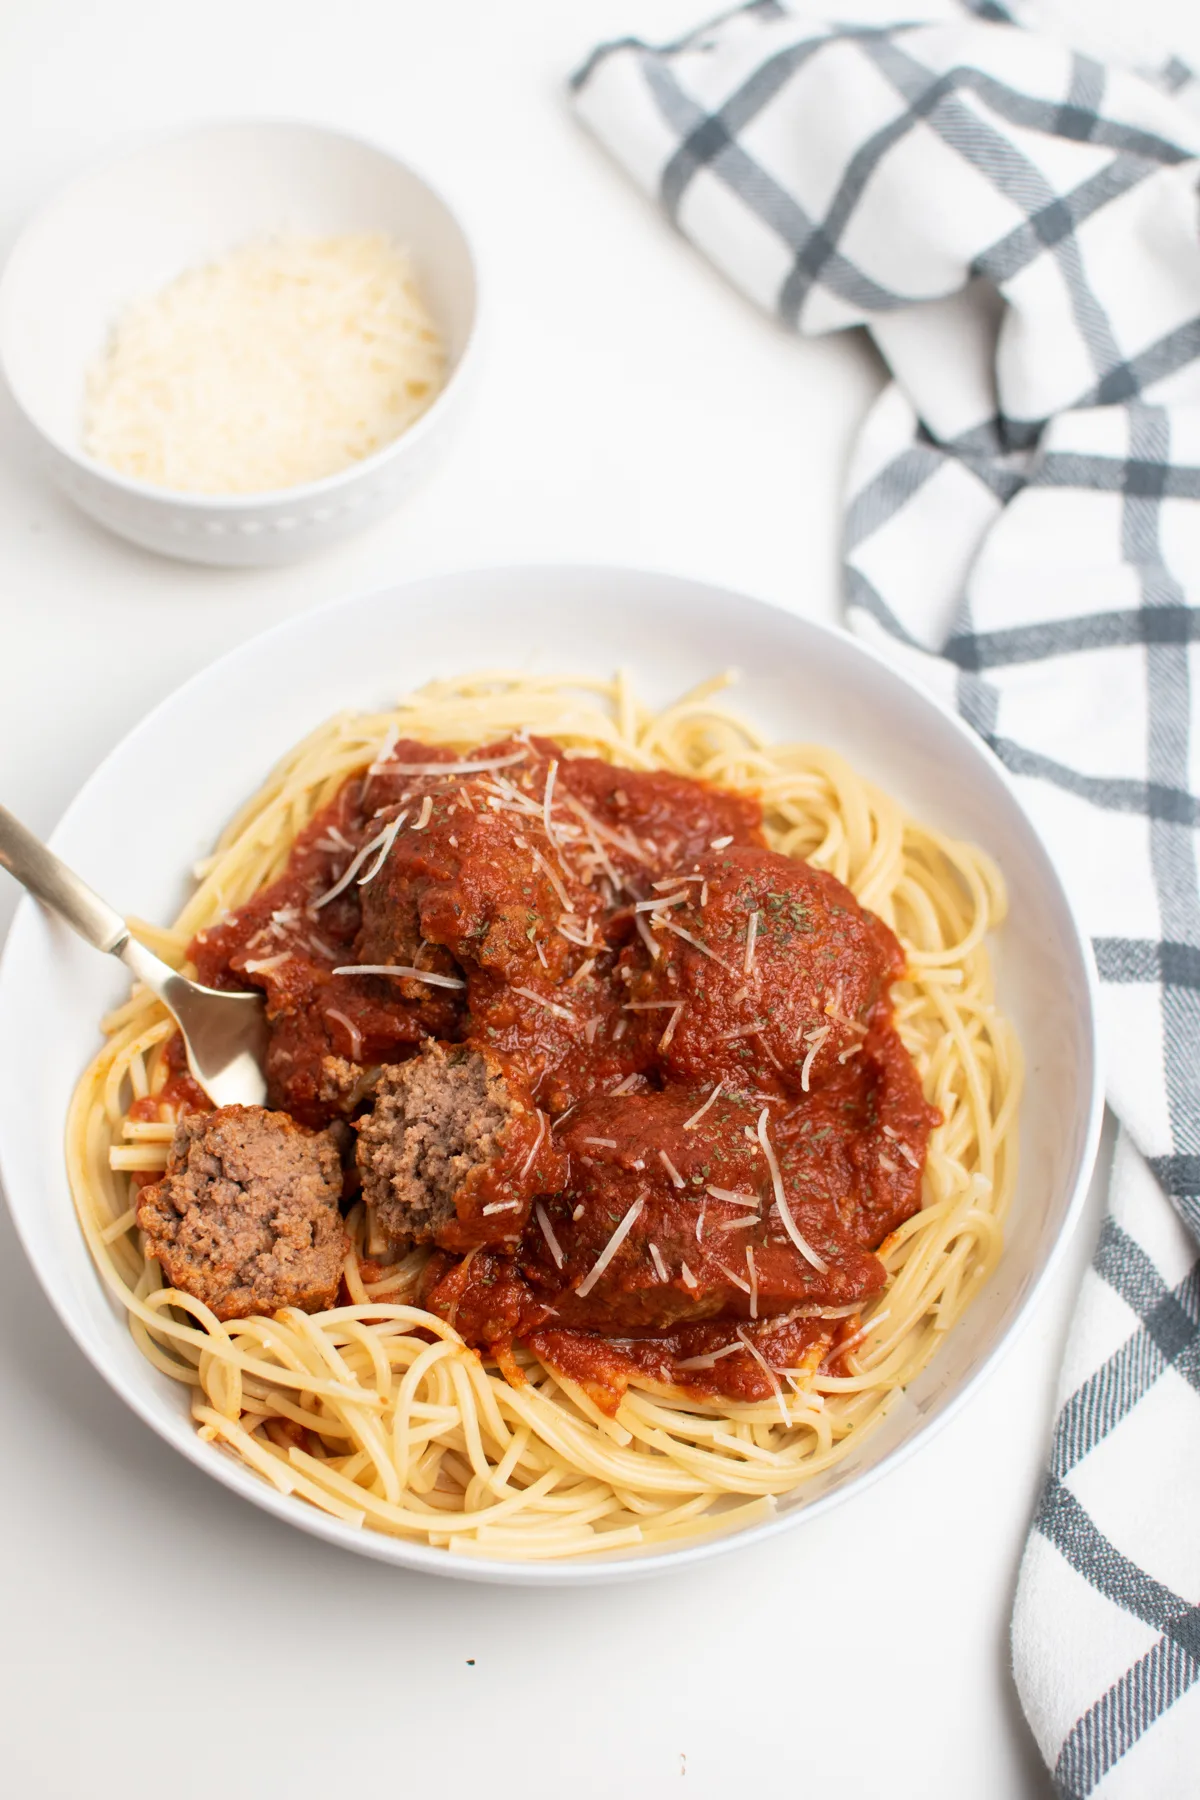 Fork in bowl with Italian spaghetti and meatballs on white table.